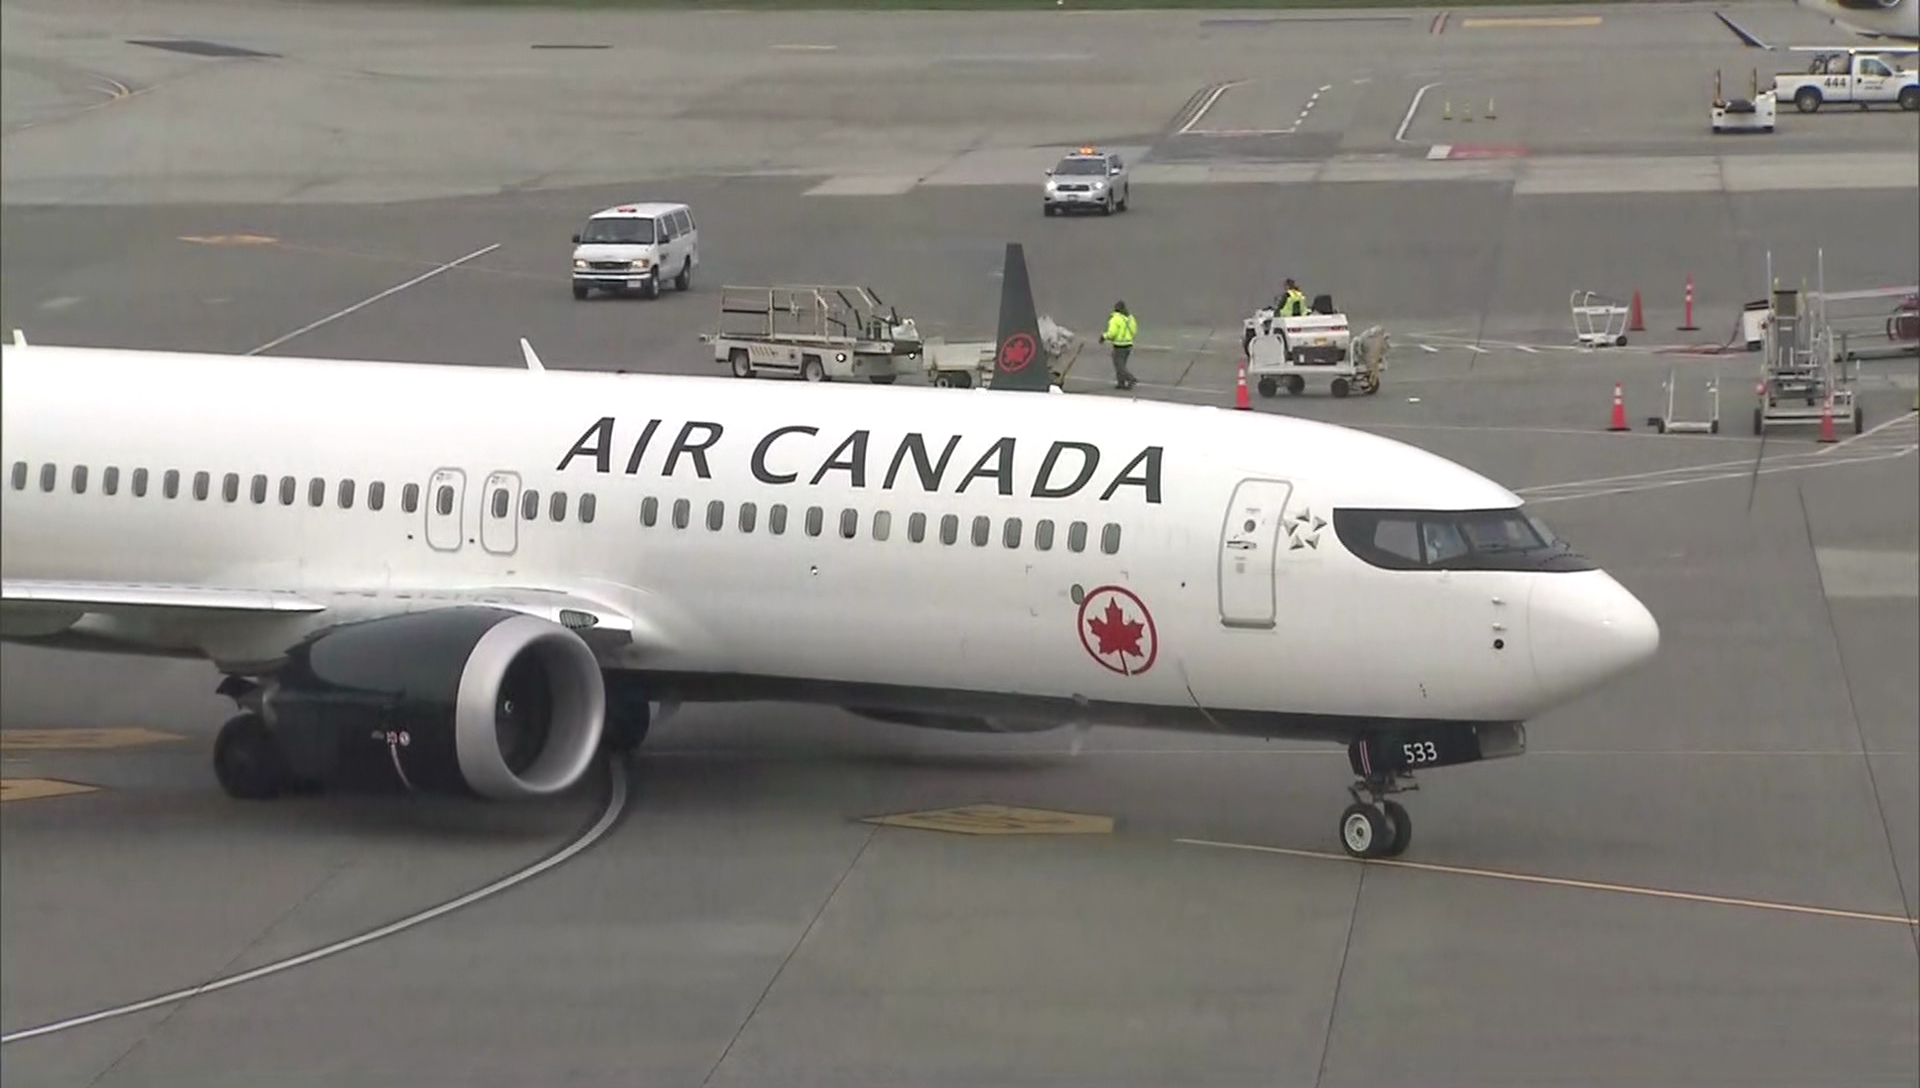 Staggering and sophisticated': A peek inside the new Air Canada